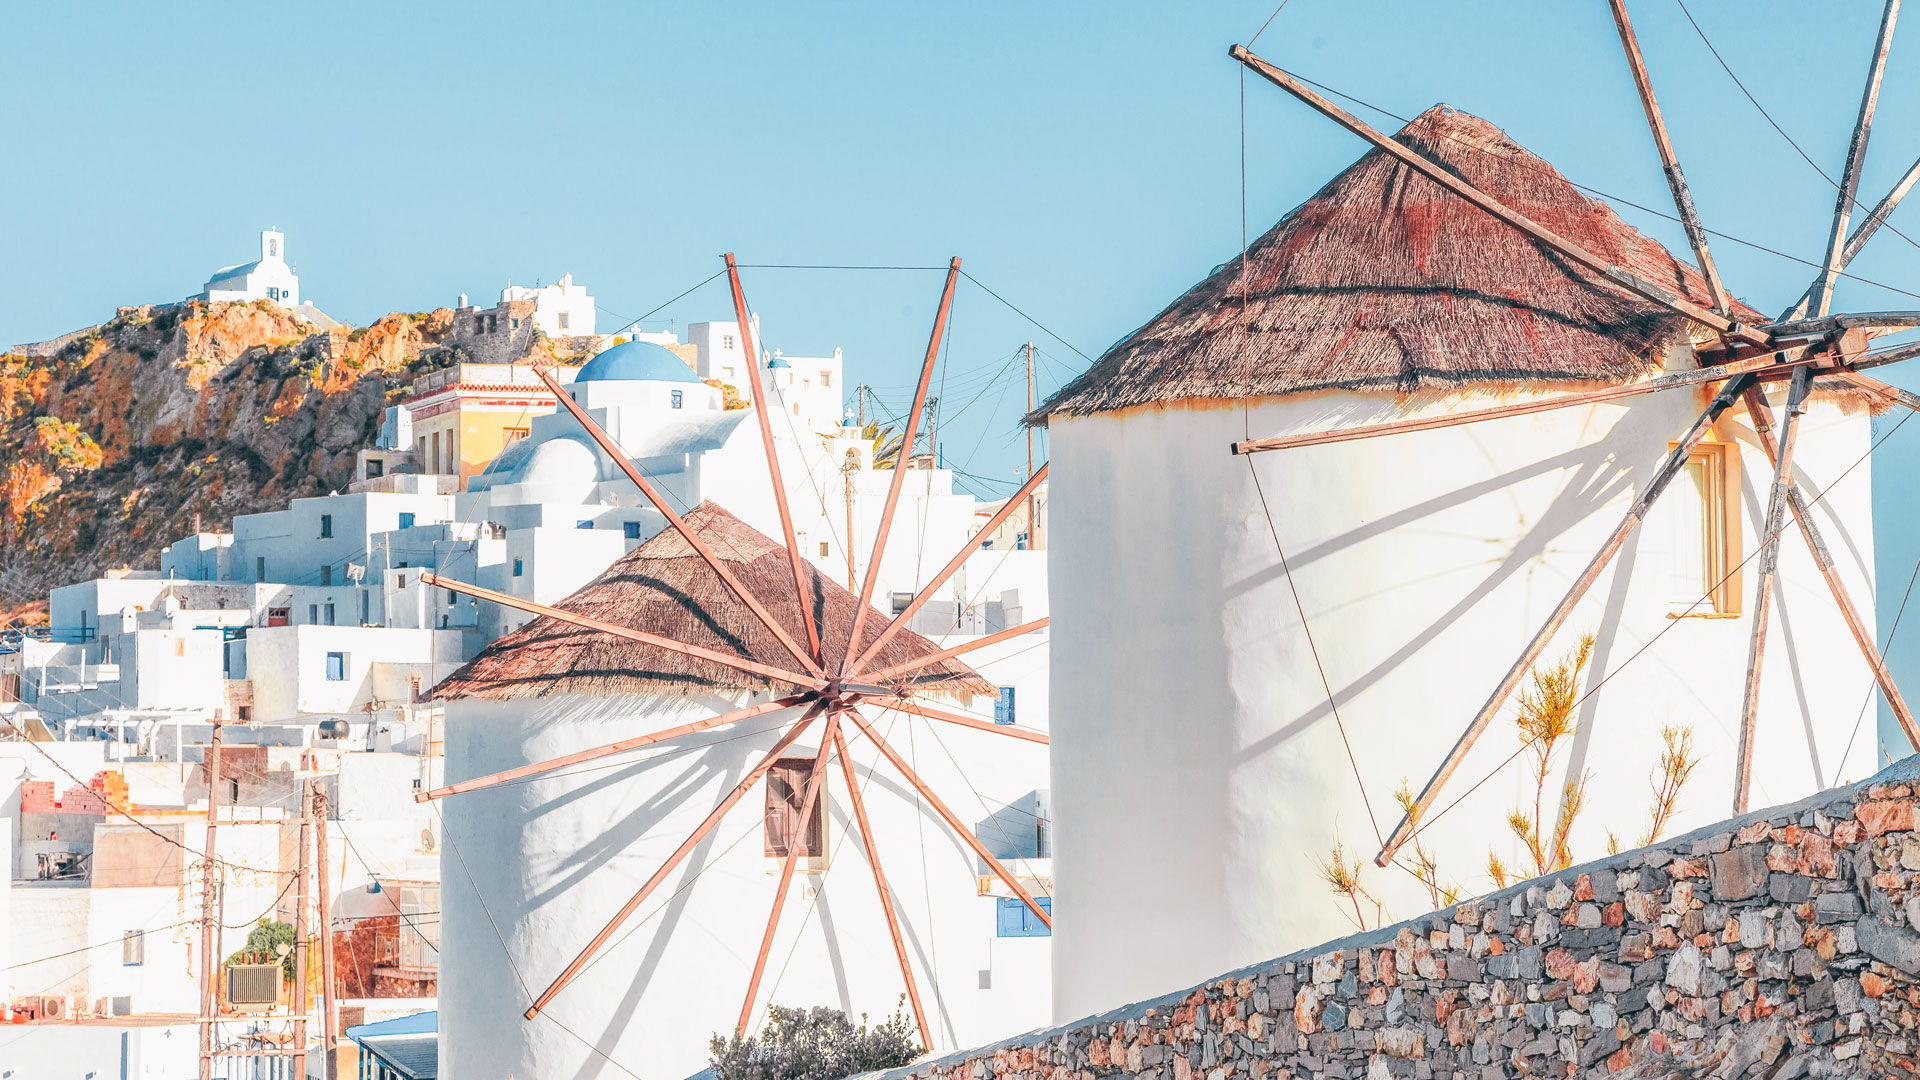 The iconic windmills of Serifos, where you’ll stop for that postcard-perfect shot of town